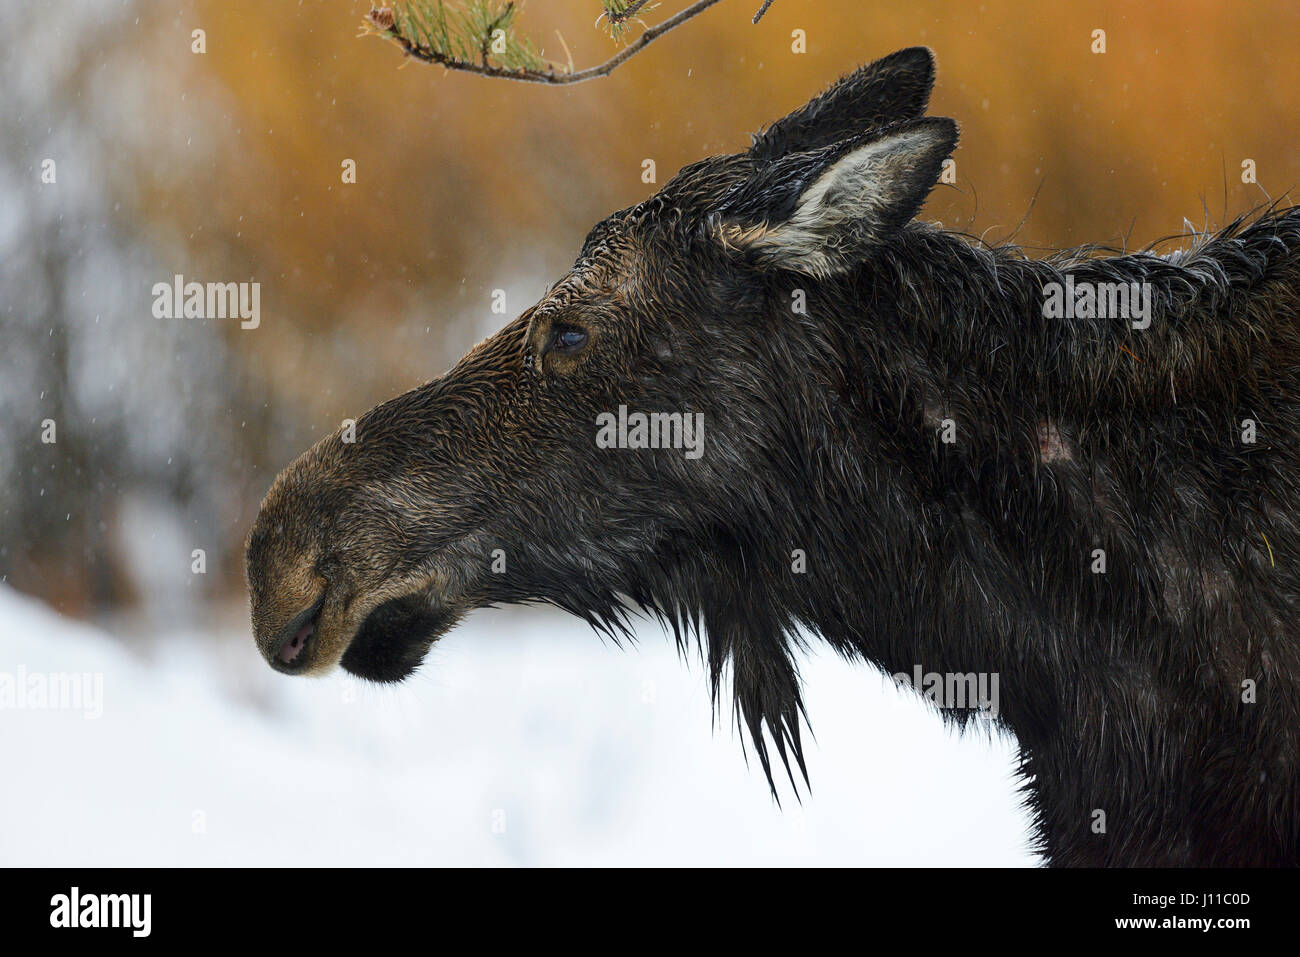 Moose / Elch ( Alces alces ), headshot of an adult female, cow, on a rainy day in winter, Yellowstone Area, Grand Teton, Wyoming, USA. Stock Photo